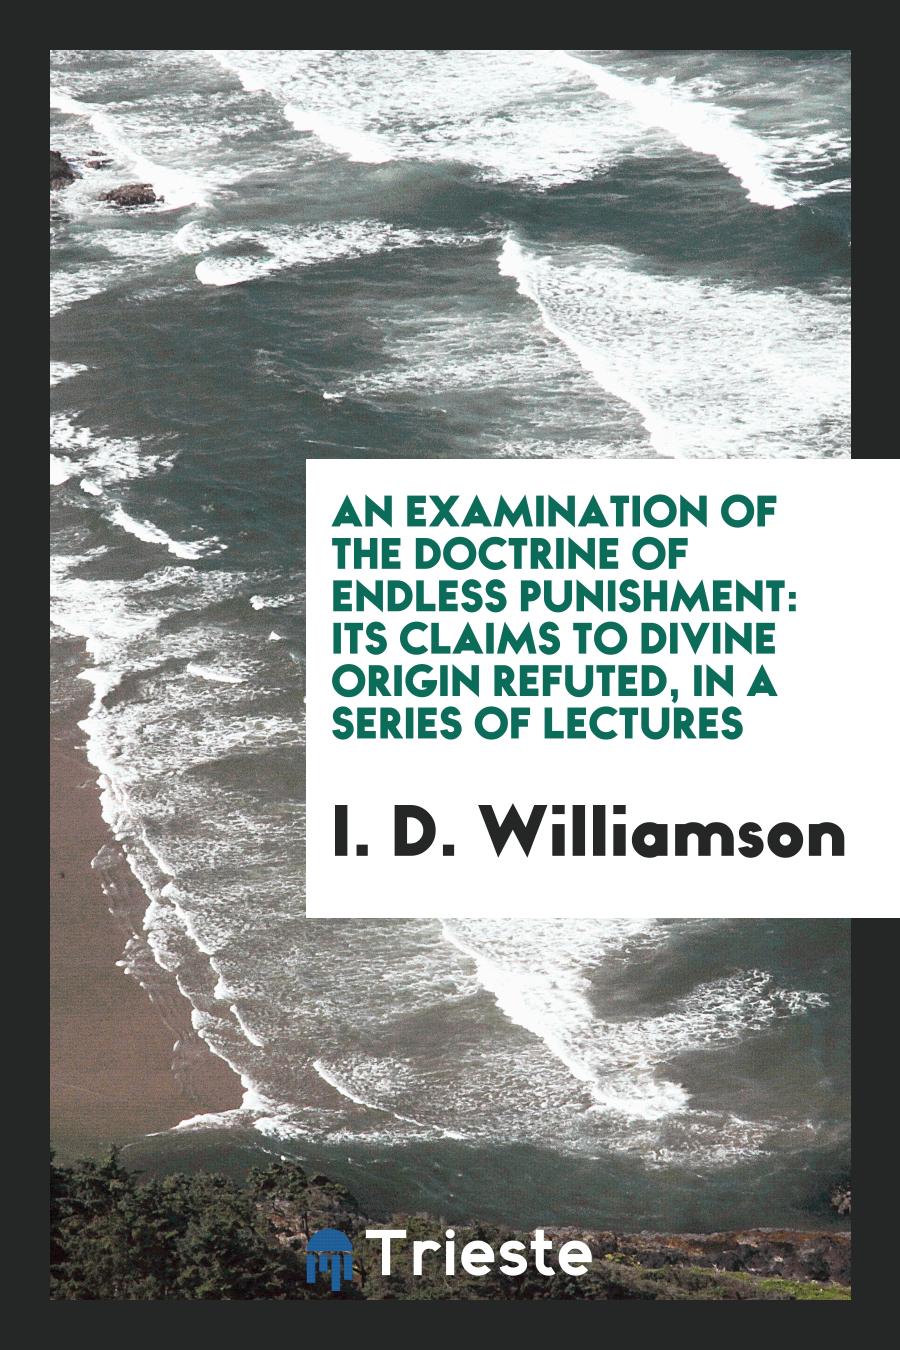 An Examination of the Doctrine of Endless Punishment: Its Claims to Divine Origin Refuted, in a Series of Lectures